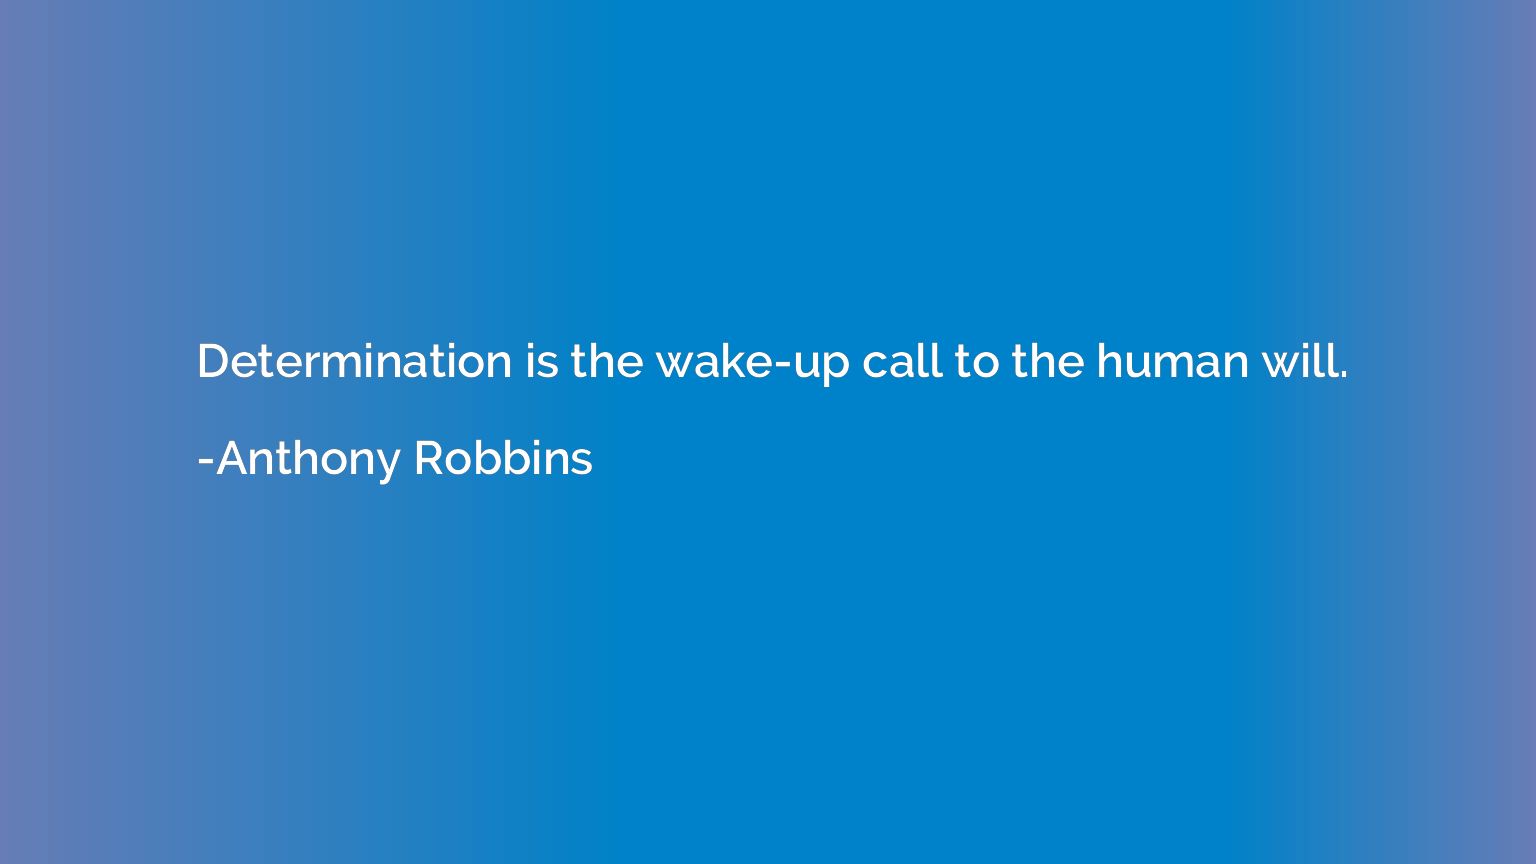 Determination is the wake-up call to the human will.